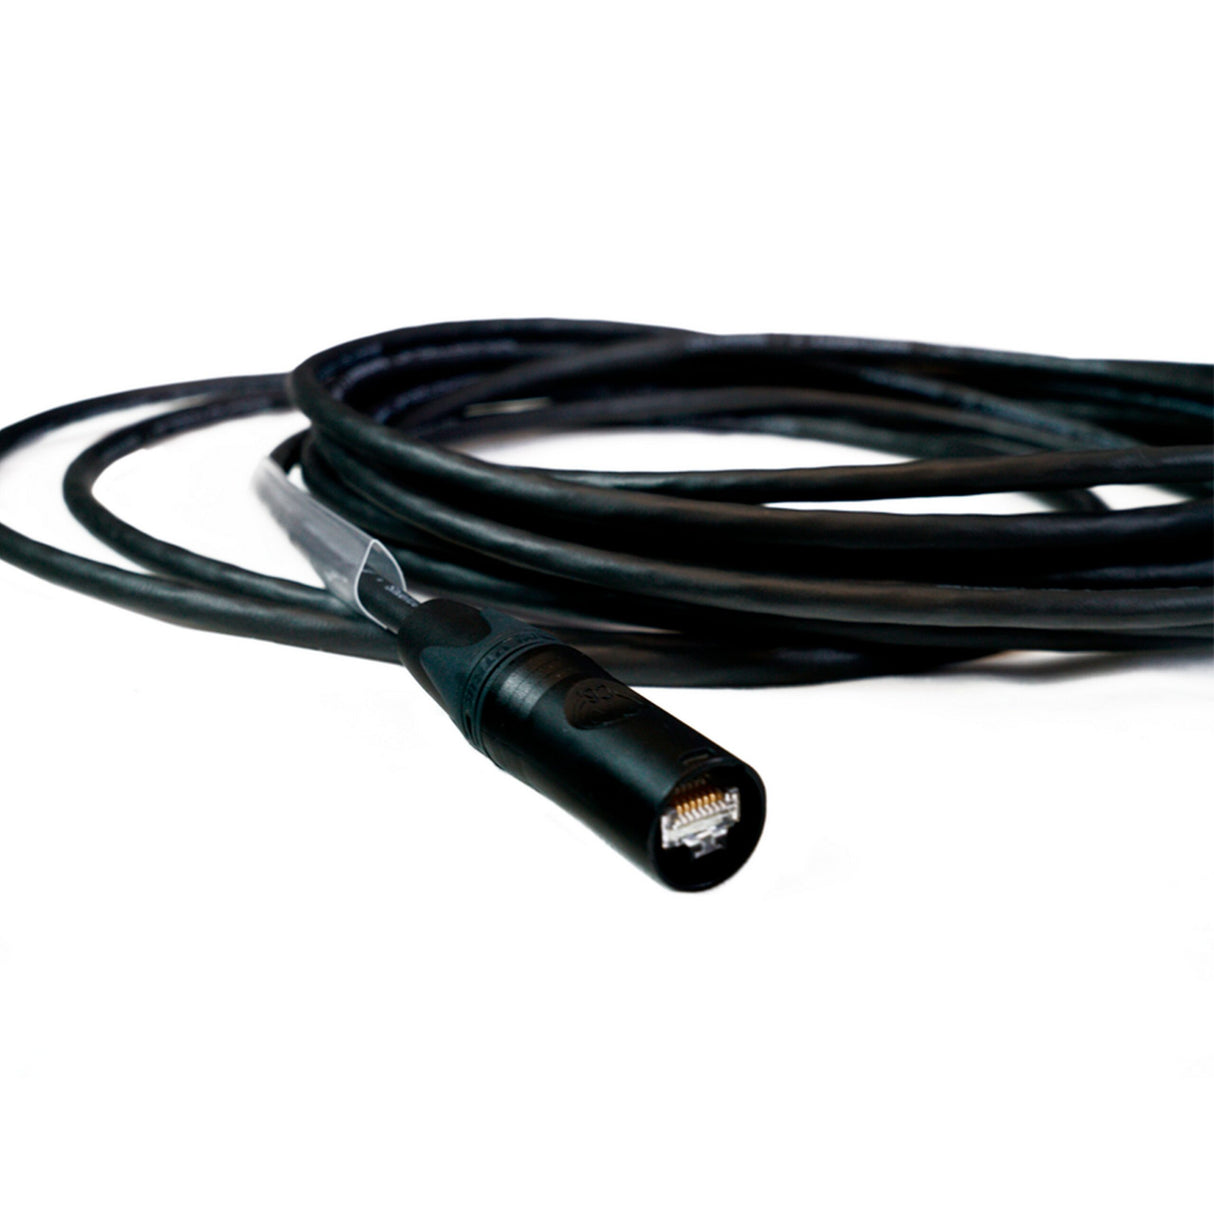 SoundTools SuperCAT 7 etherCON to etherCON CAT 7 Cable, 10-Foot Black